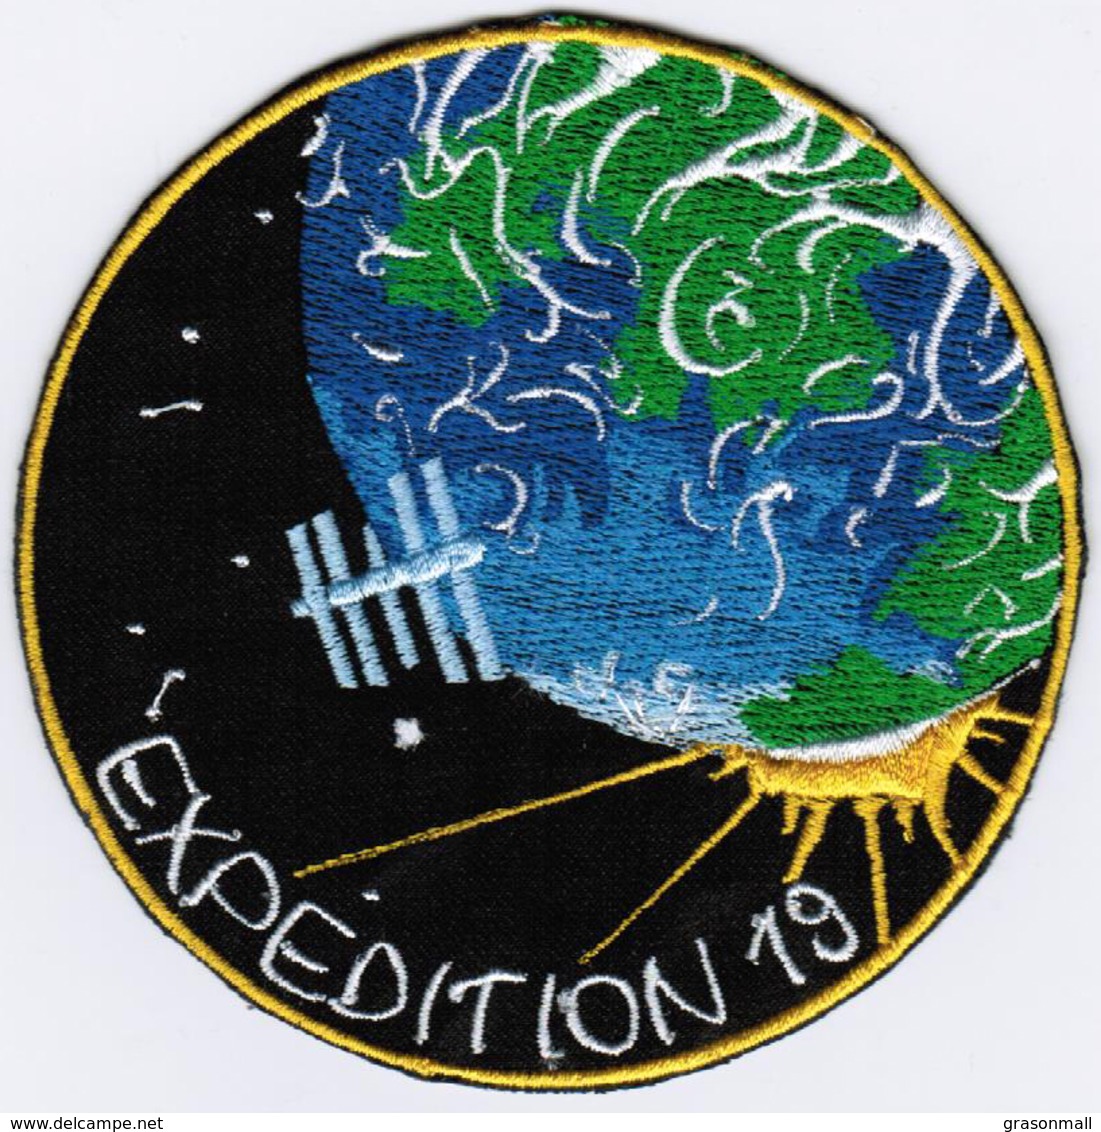 ISS Expedition 19 #NoWords International Space Station Iron On Embroidered Patch - Patches